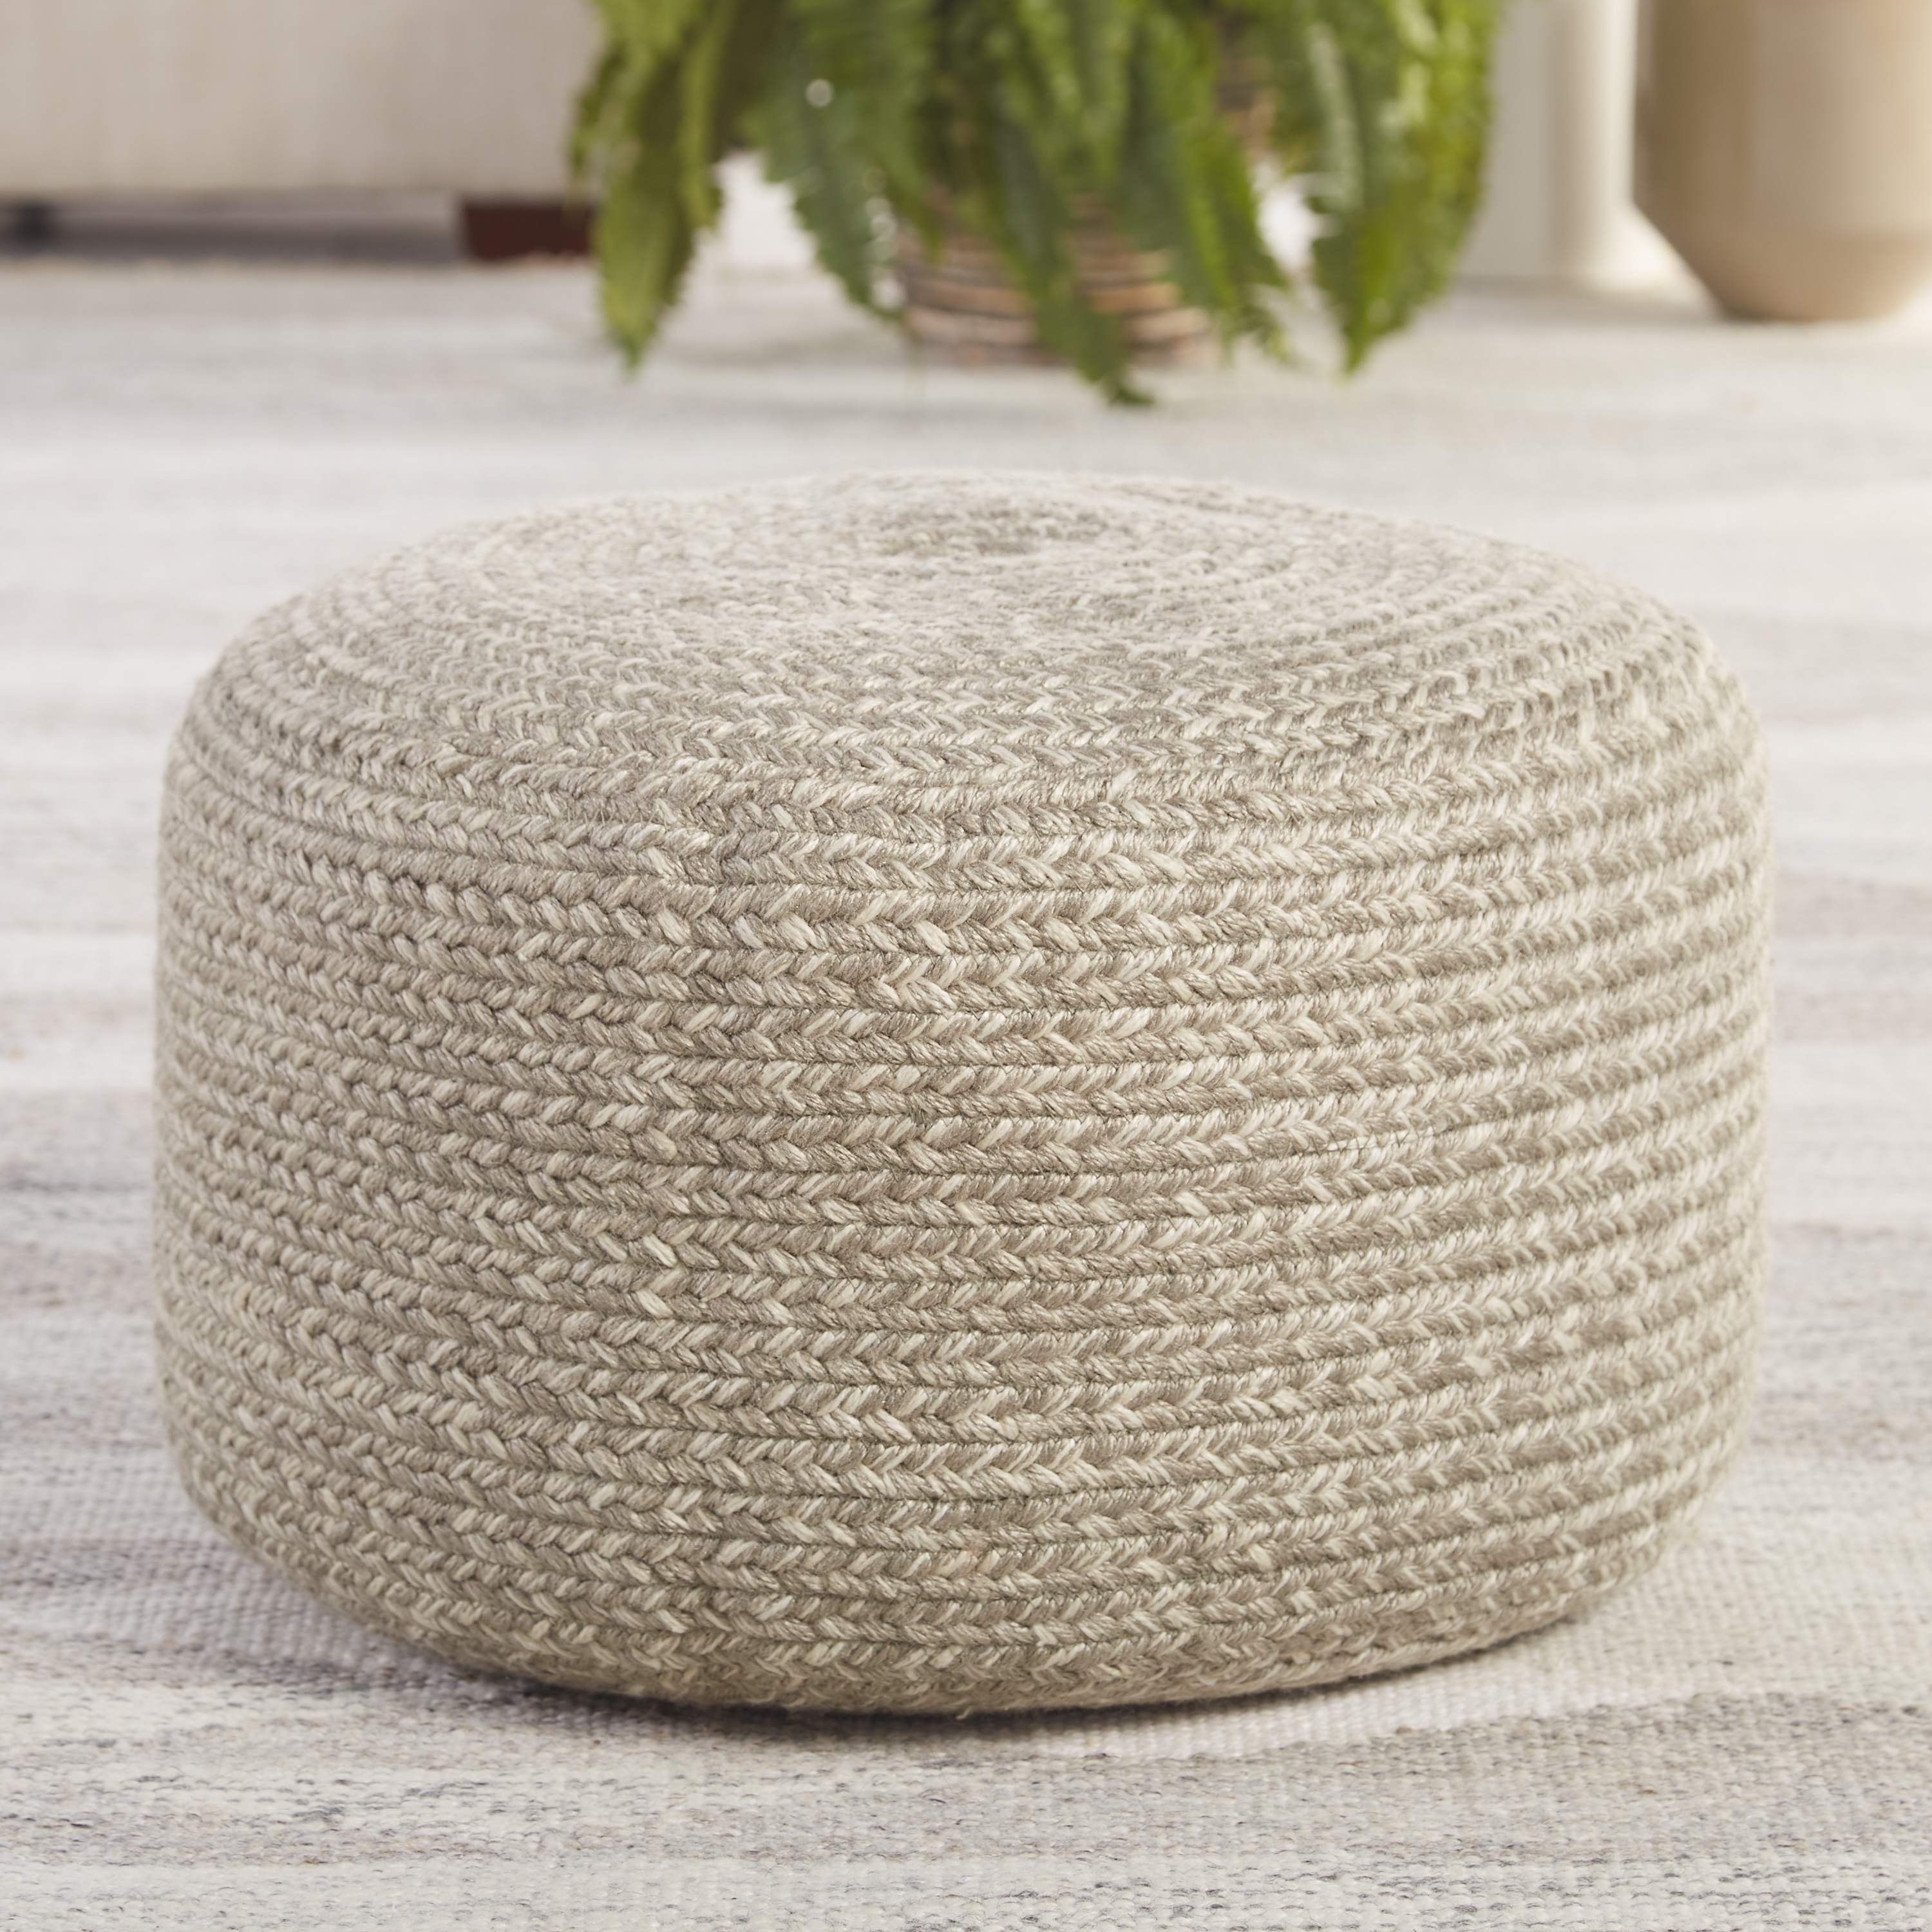 Vibe by Santa Rosa Indoor/ Outdoor Solid Gray/ Cream Cylinder Pouf - Image 1